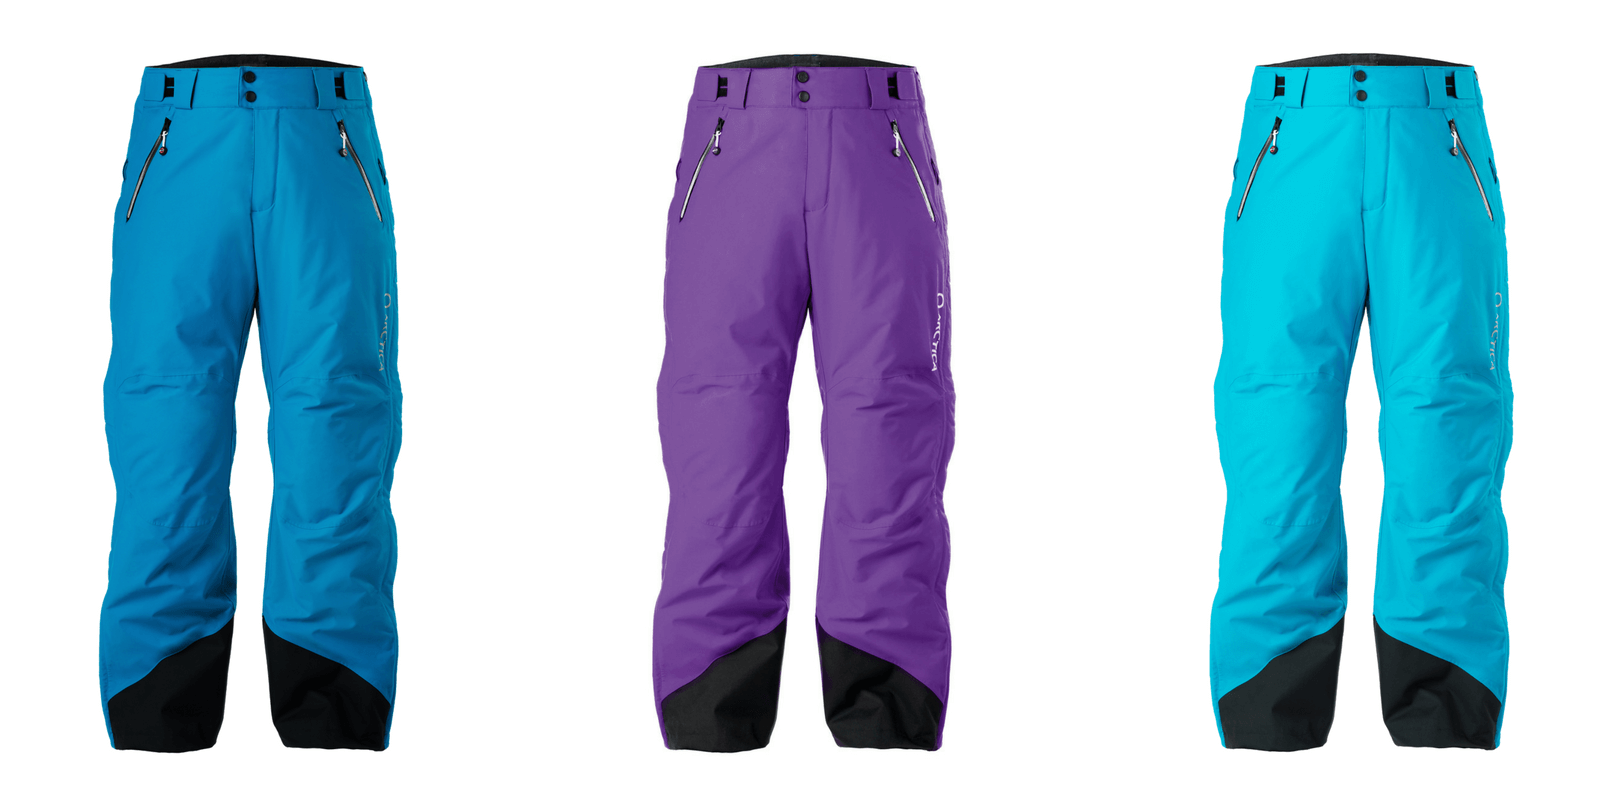 Arctica Side Zip 2.0 pant colors for 2017-18. Ocean, Purple and Sky.